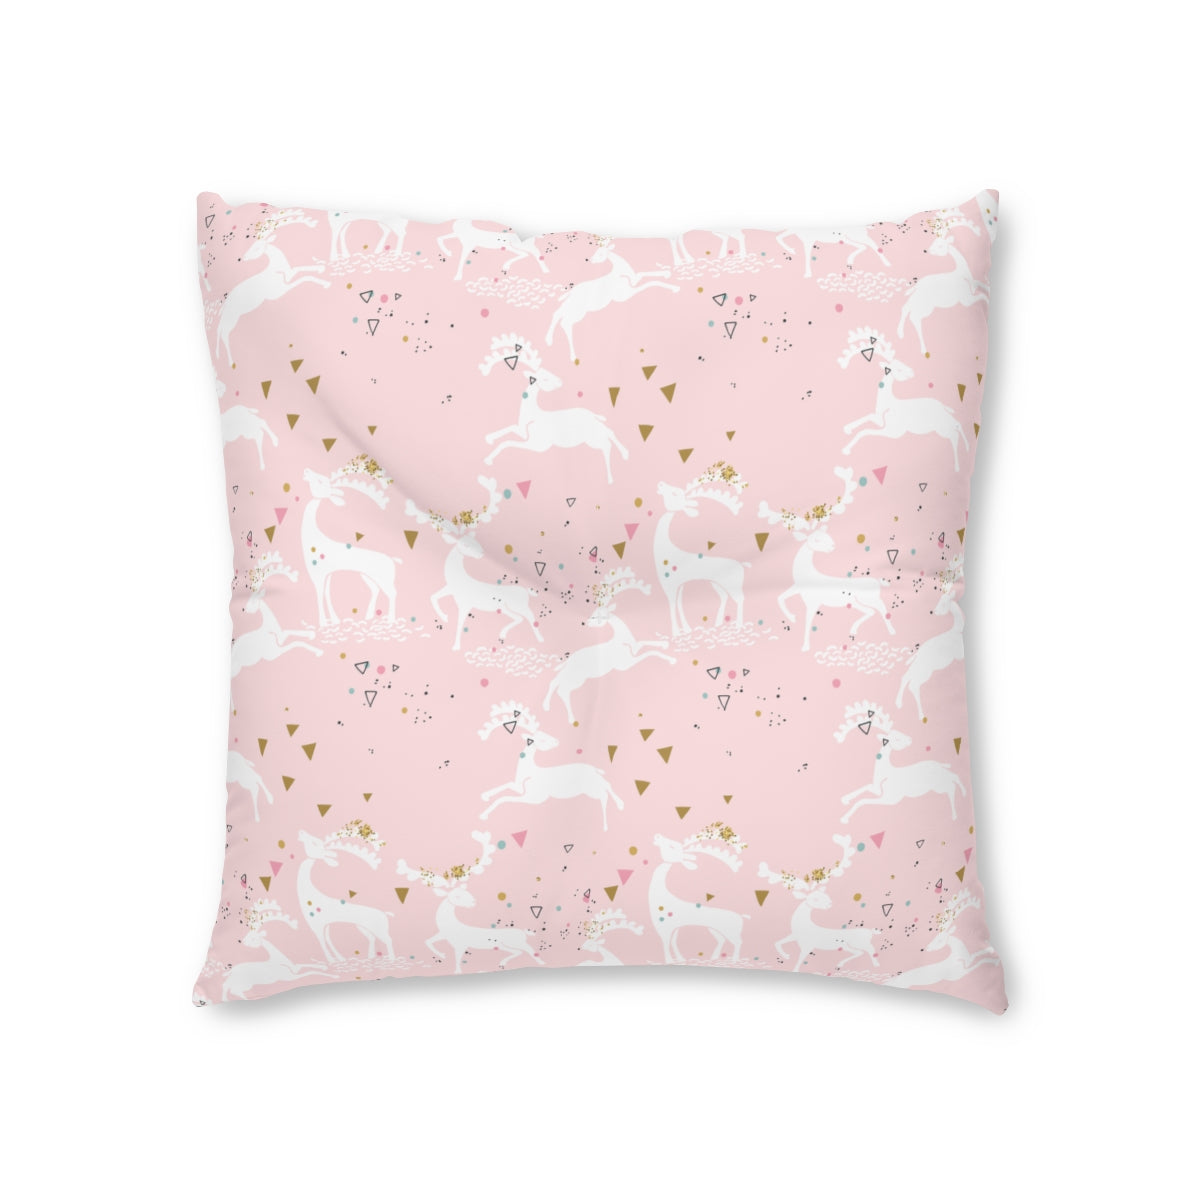 Magical Reindeers Tufted Floor Pillow, Square